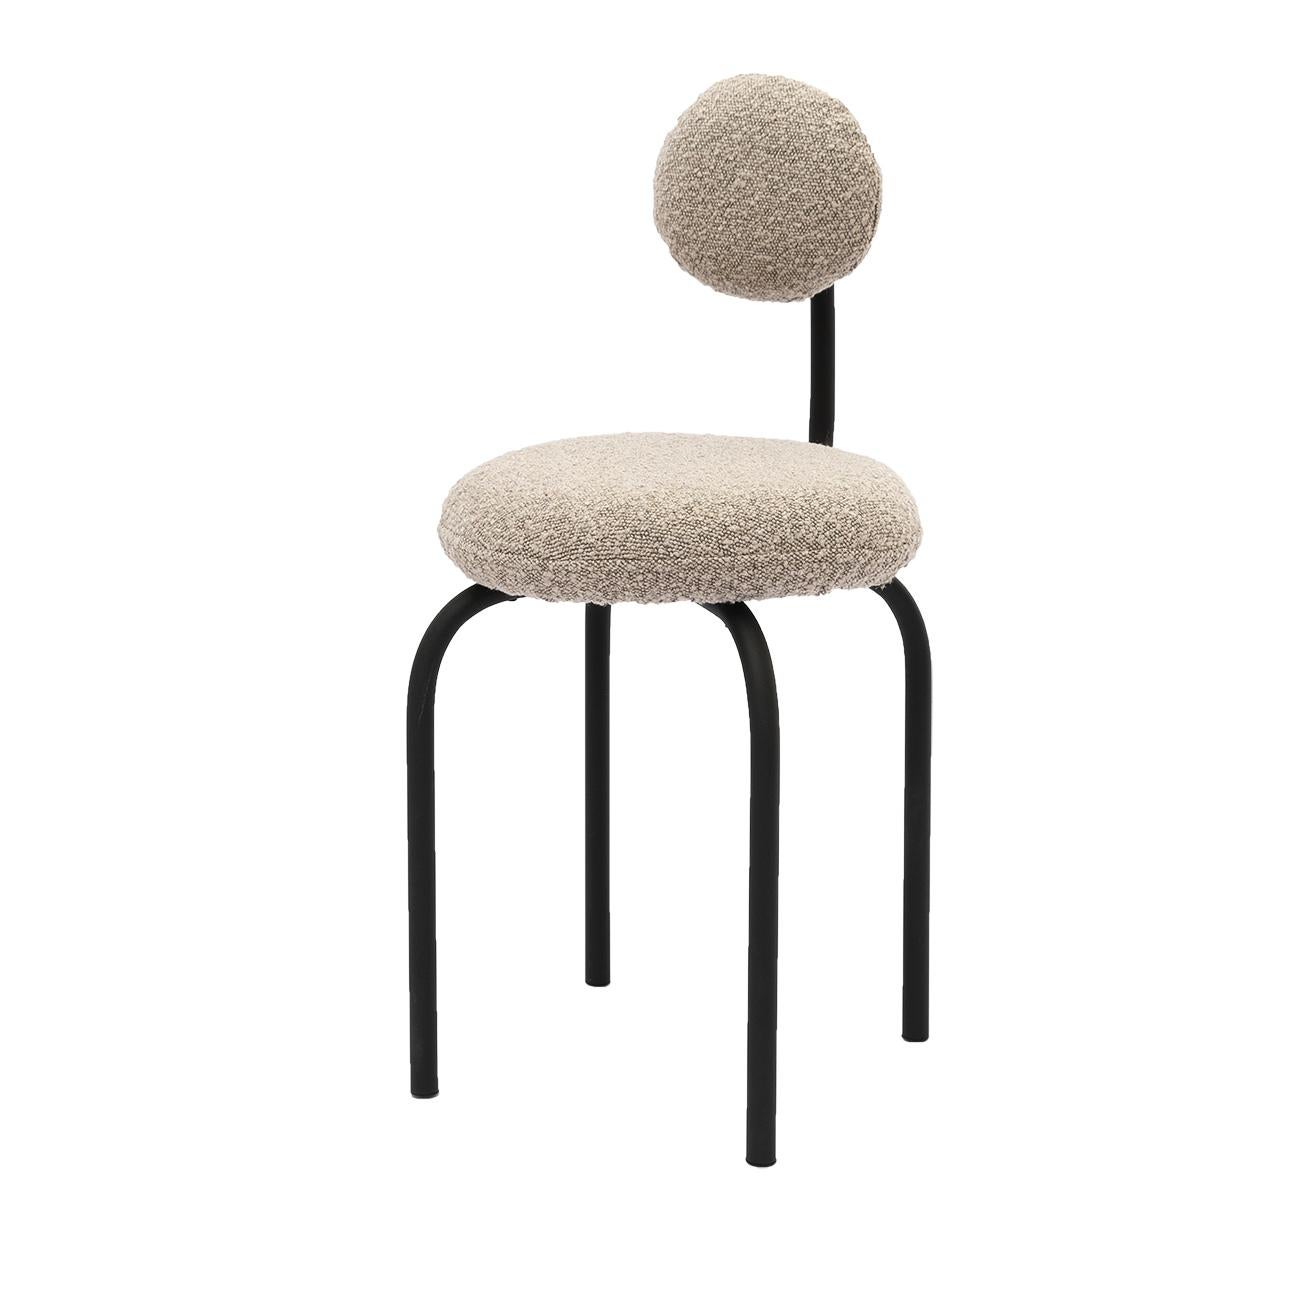 Object 077 Chair by NG Design
Dimensions: W 44 x D 50 x H 78 cm
Materials: Bouclé Fabric, Powder-Coated Steel

Also Available: All of objects available in different materials and colors on demand.

The Object 077 Chair is comfort and minimalism. The